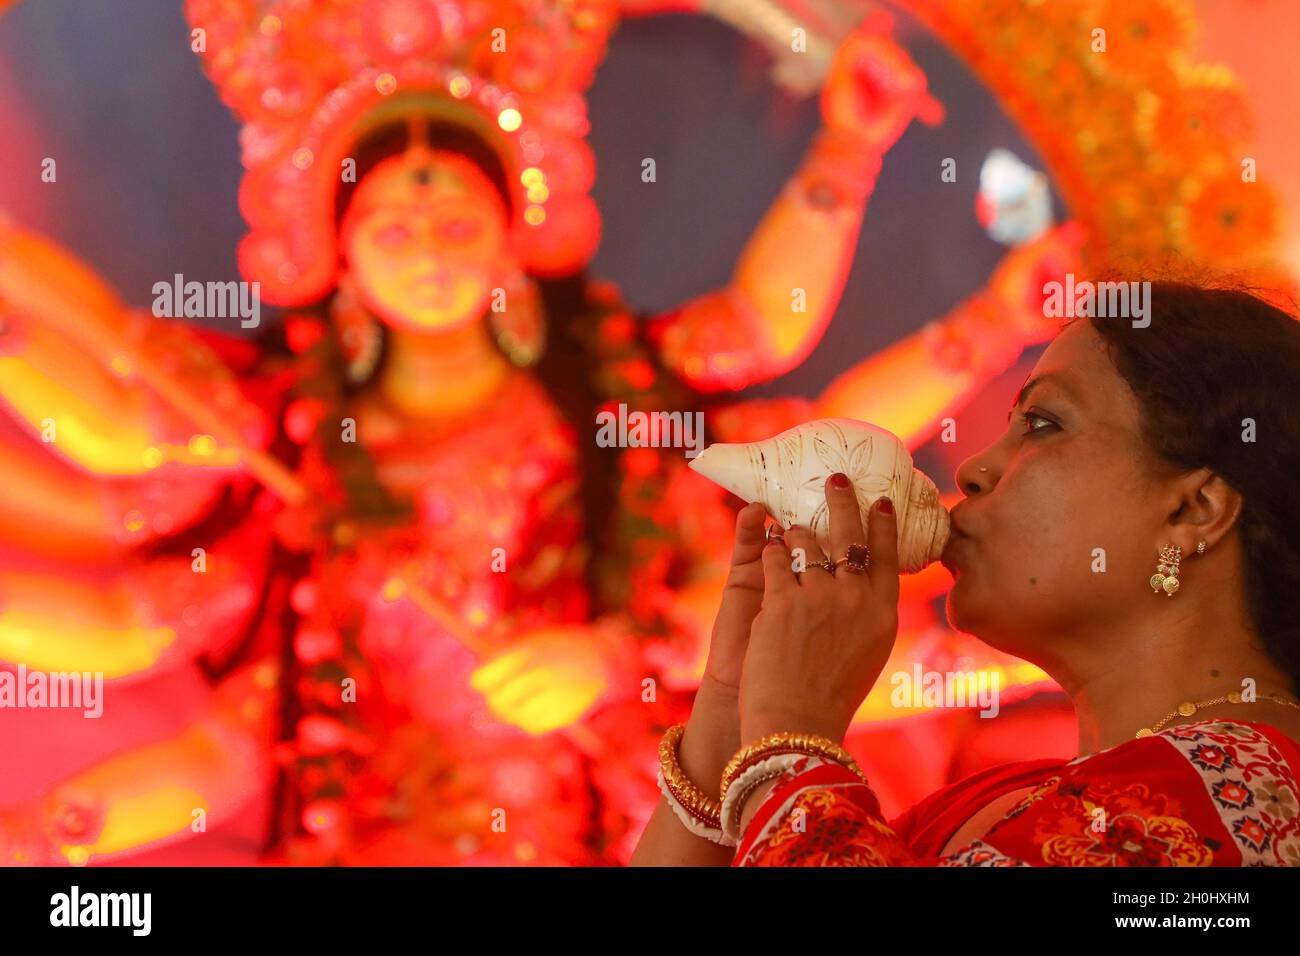 Dhaka, Bangladesh. 12th Oct, 2021. A Hindu Devotee seen blowing conch shells to Goddess Durga, during the festival.7th day of Durga puja festival known as Saptami, the biggest Hindu festival running for 9 days all over Bangladesh. (Photo by Md Manik/SOPA Images/Sipa USA) Credit: Sipa USA/Alamy Live News Stock Photo